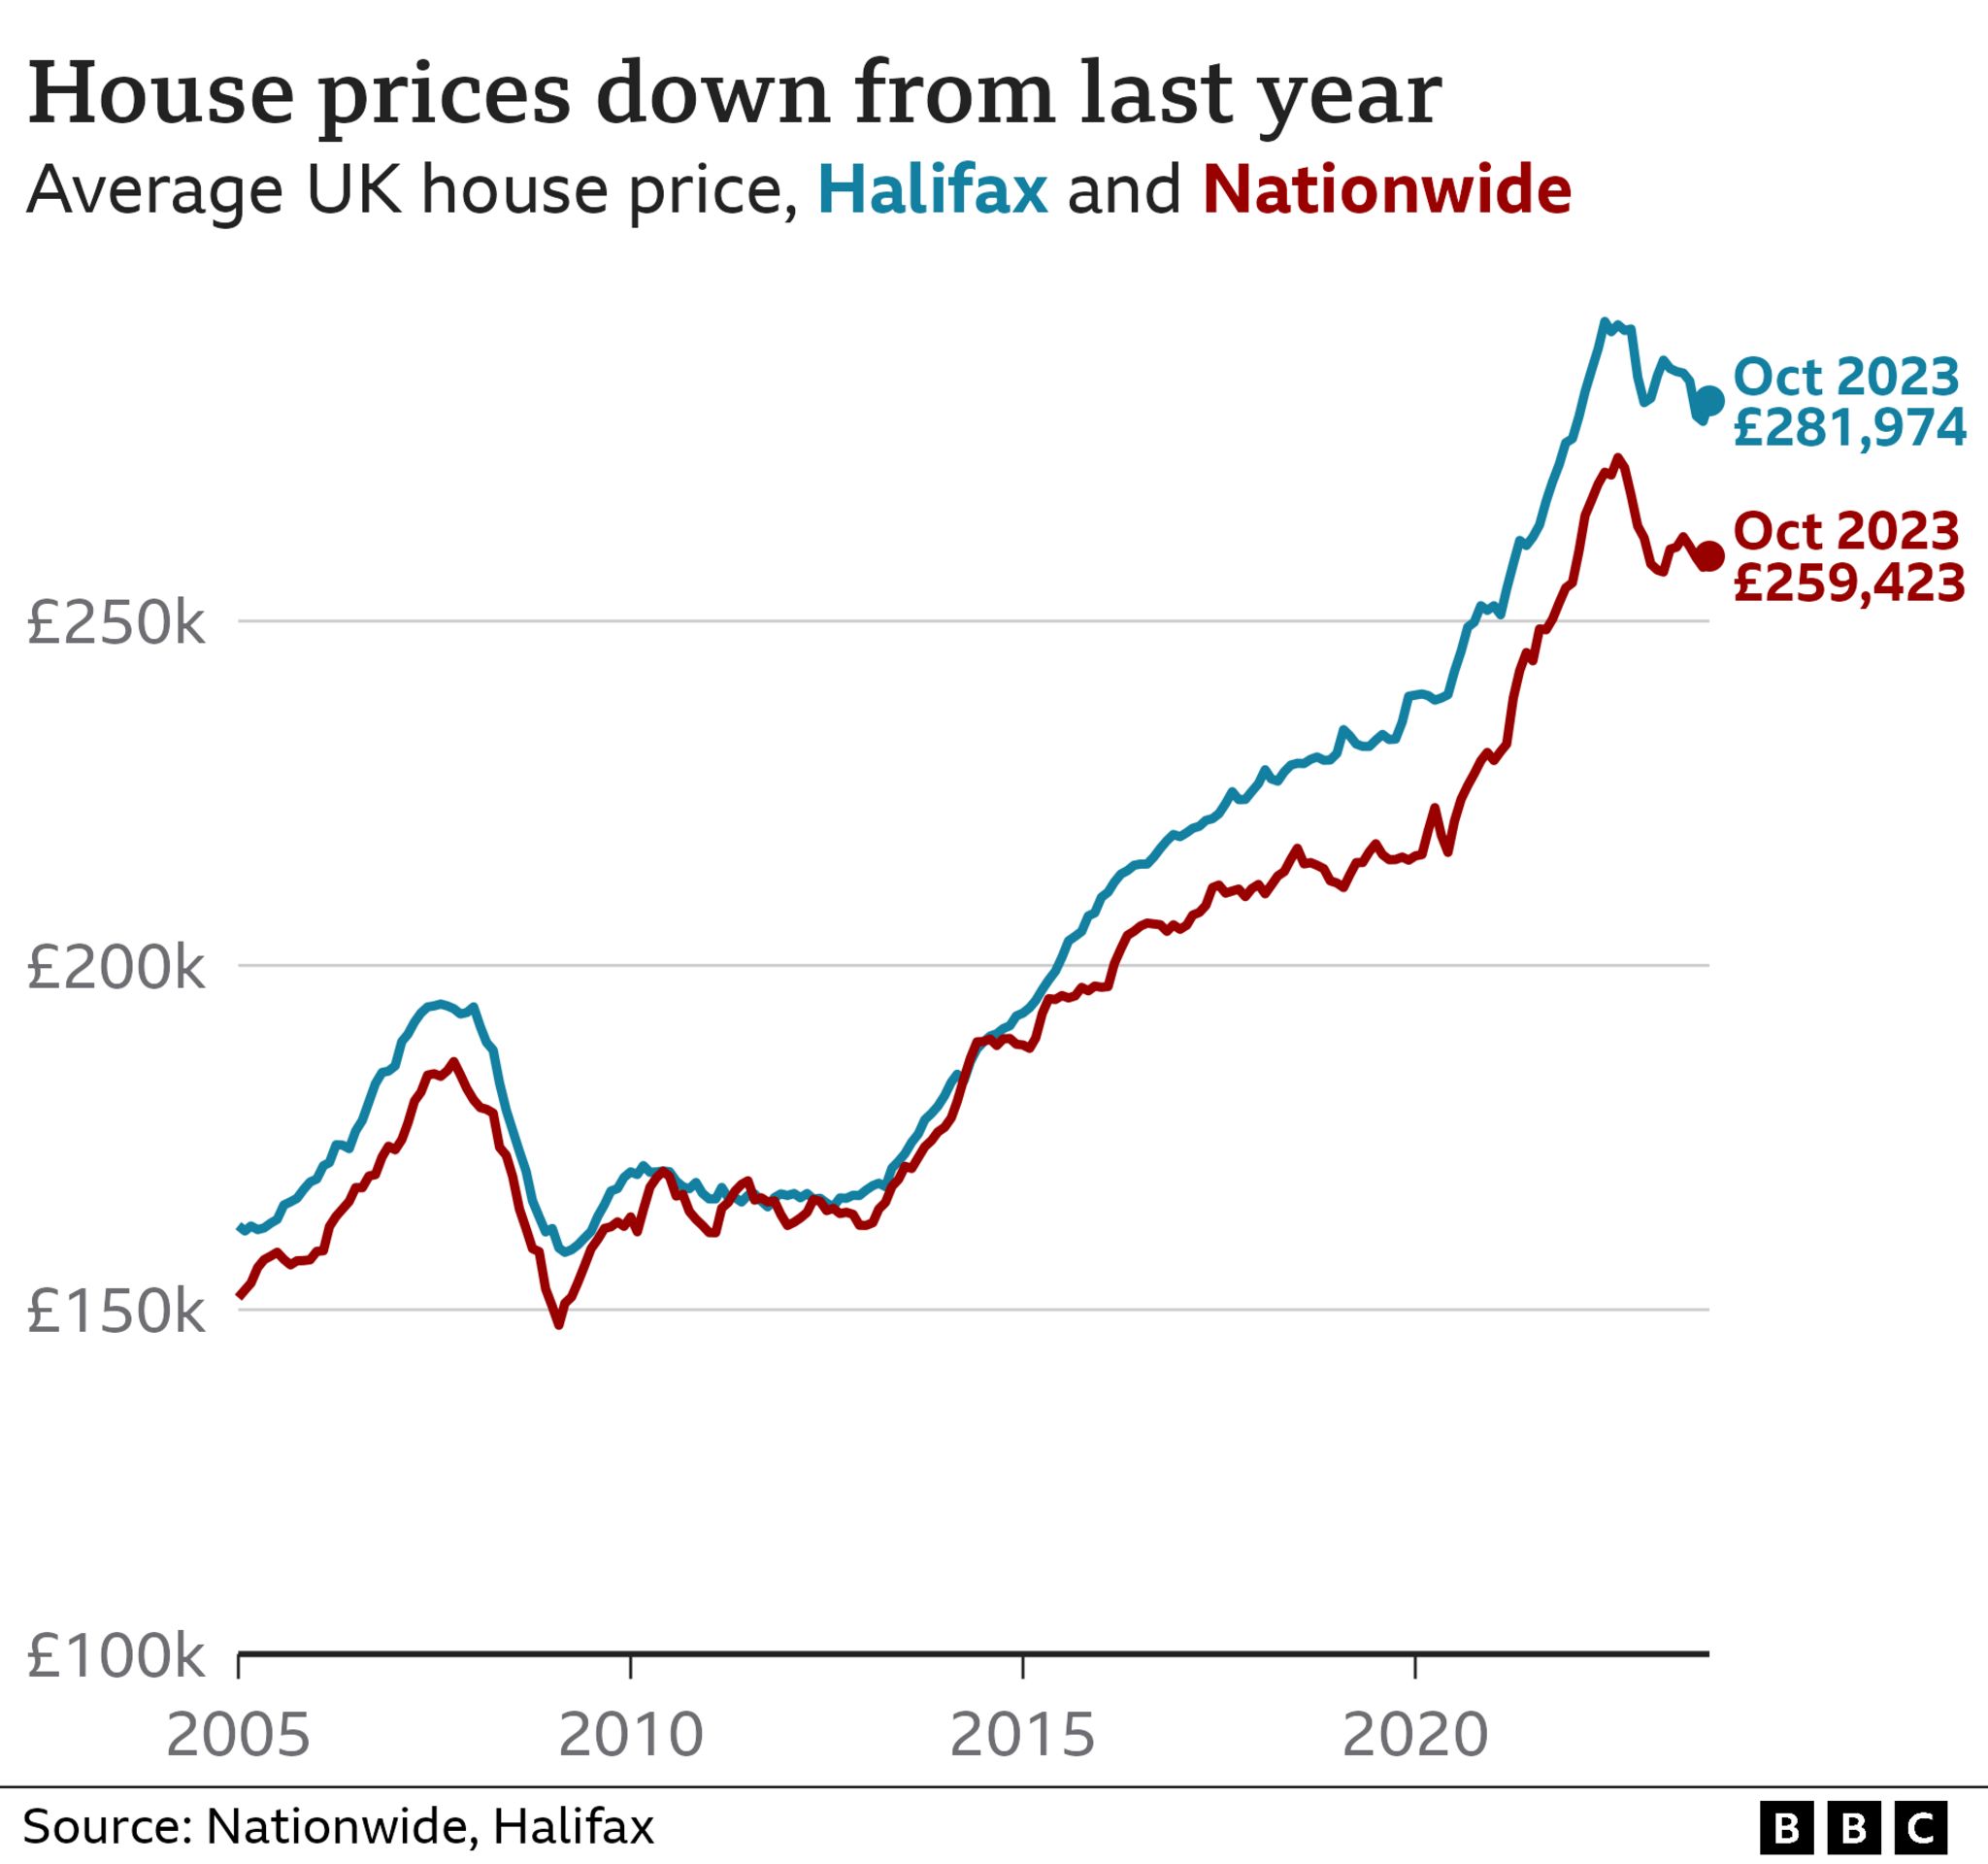 Line chart showing the average UK house price According to Nationwide, it was £259,423 in October 2023, while according to Halifax, it was £281,974.